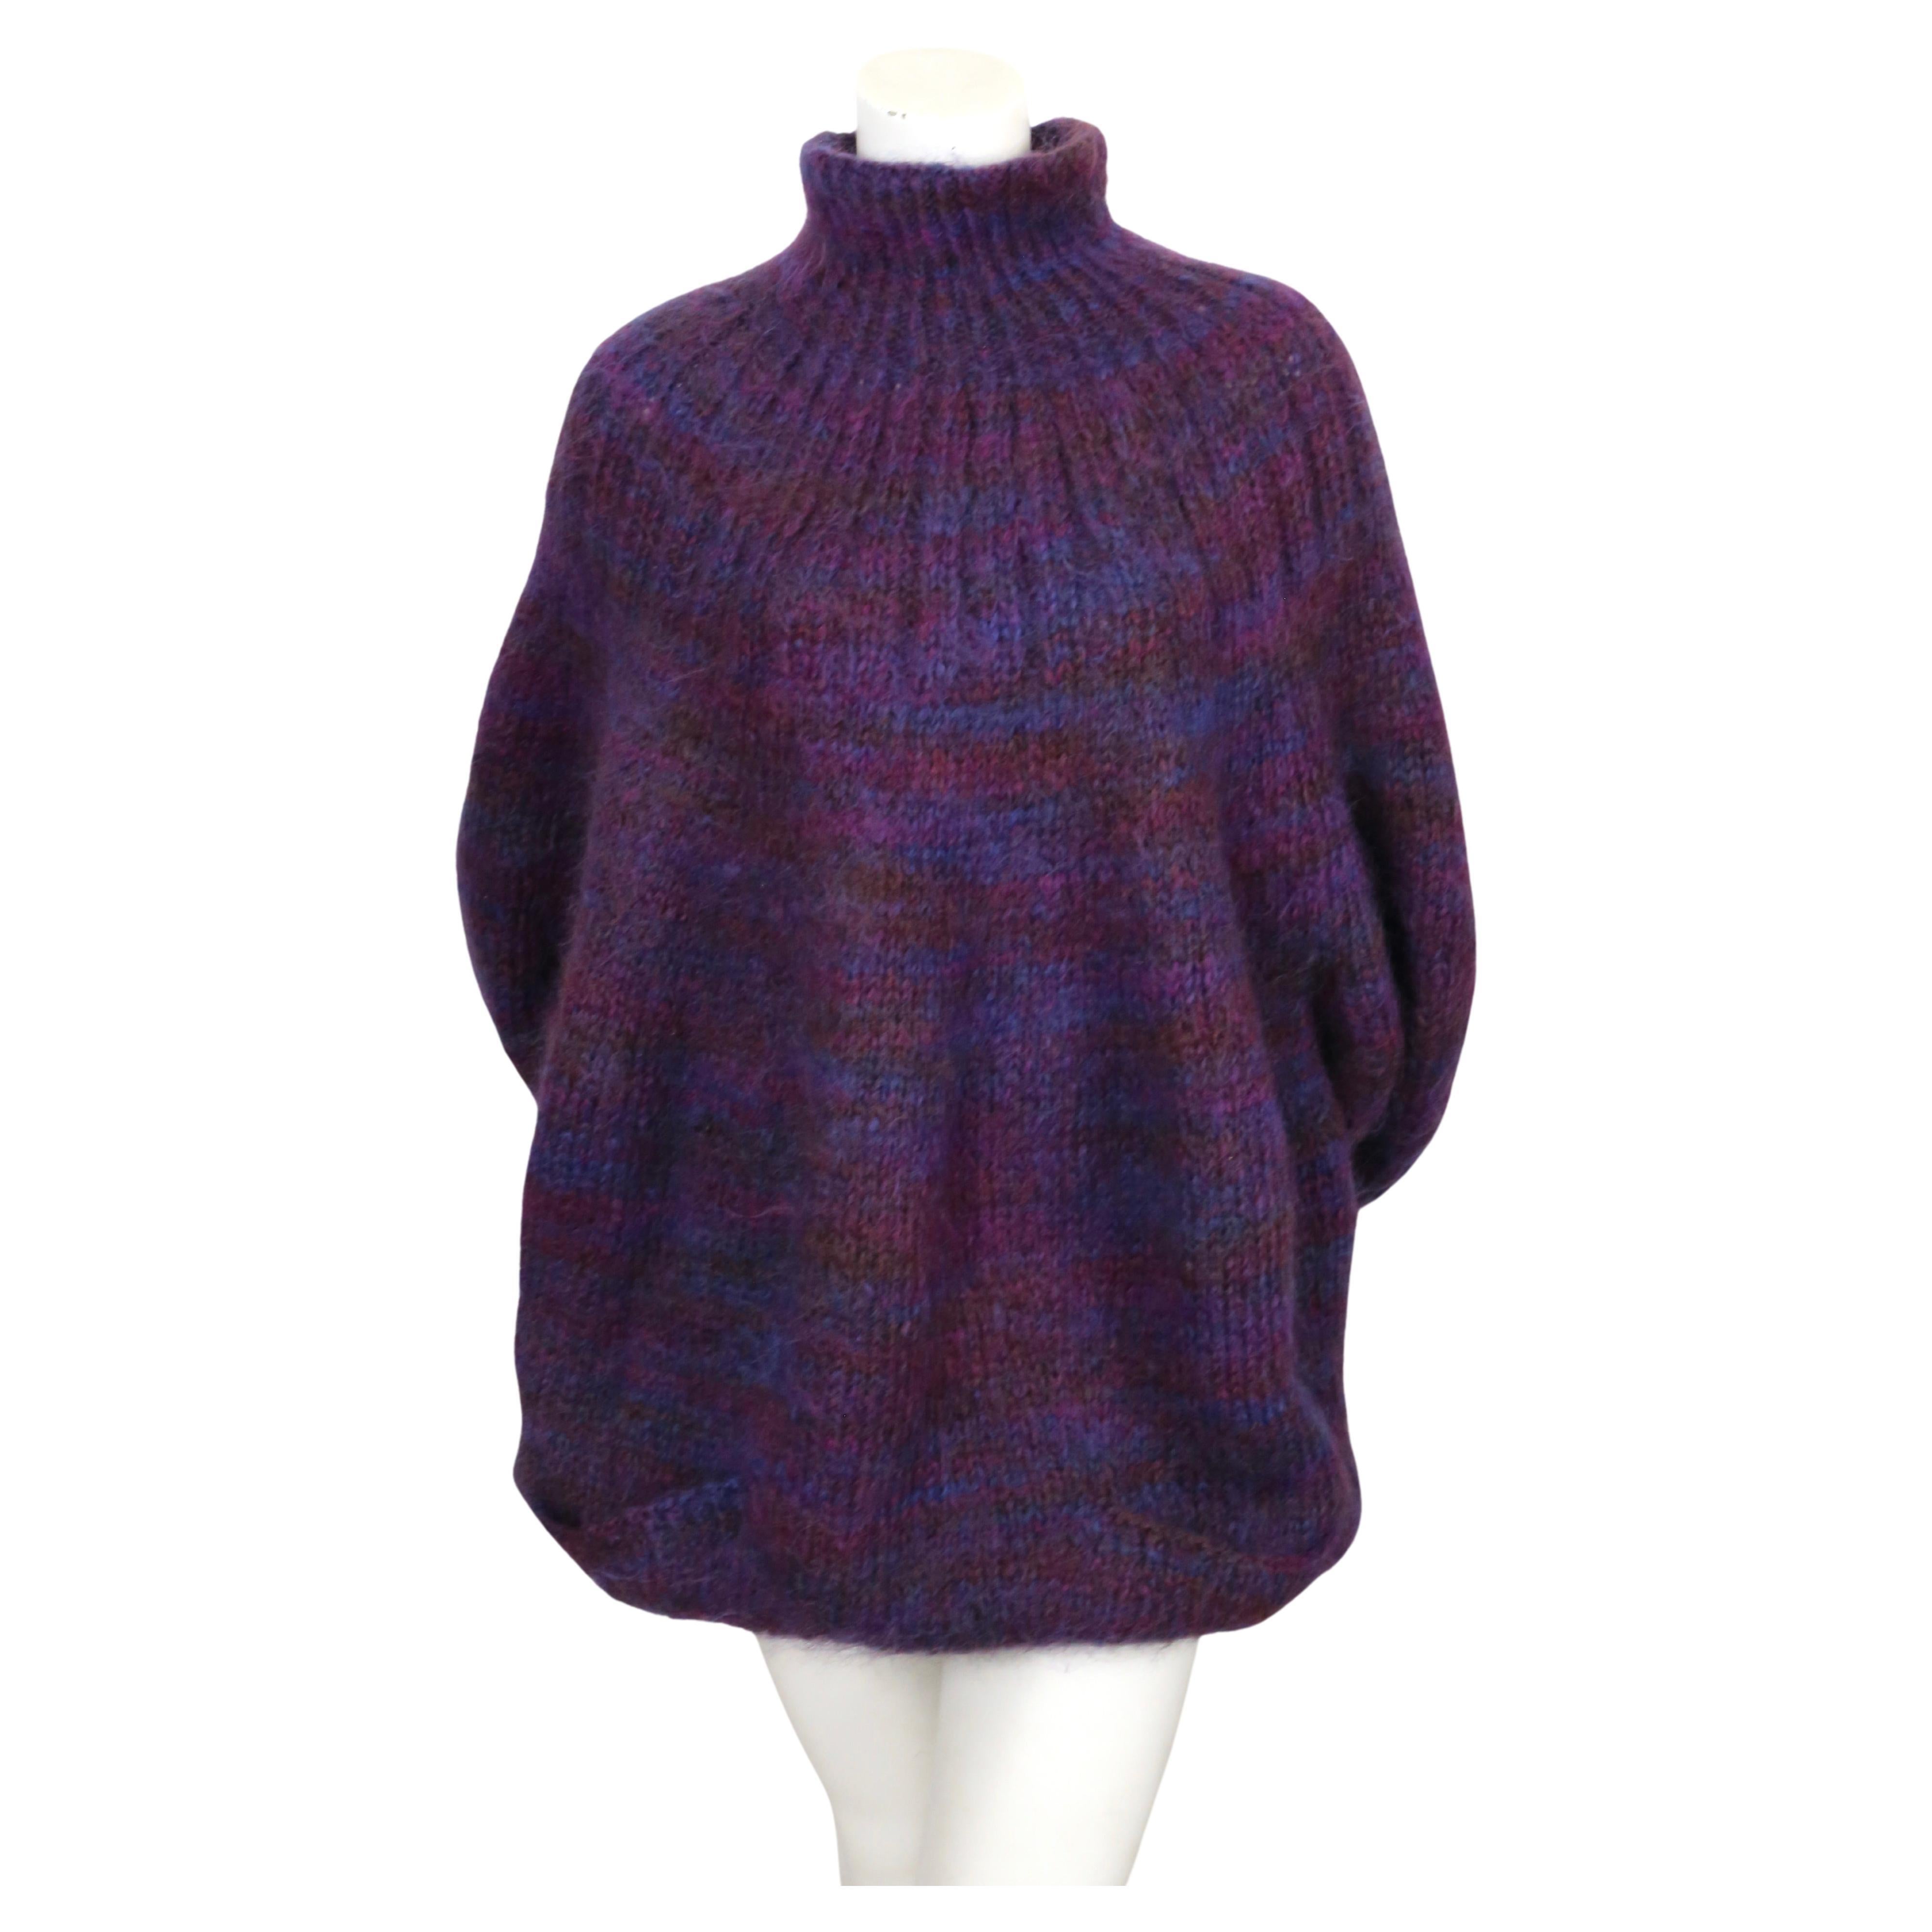 1989 PERRY ELLIS by MARC JACOBS oversized purple handknit sweater dress In Good Condition In San Fransisco, CA